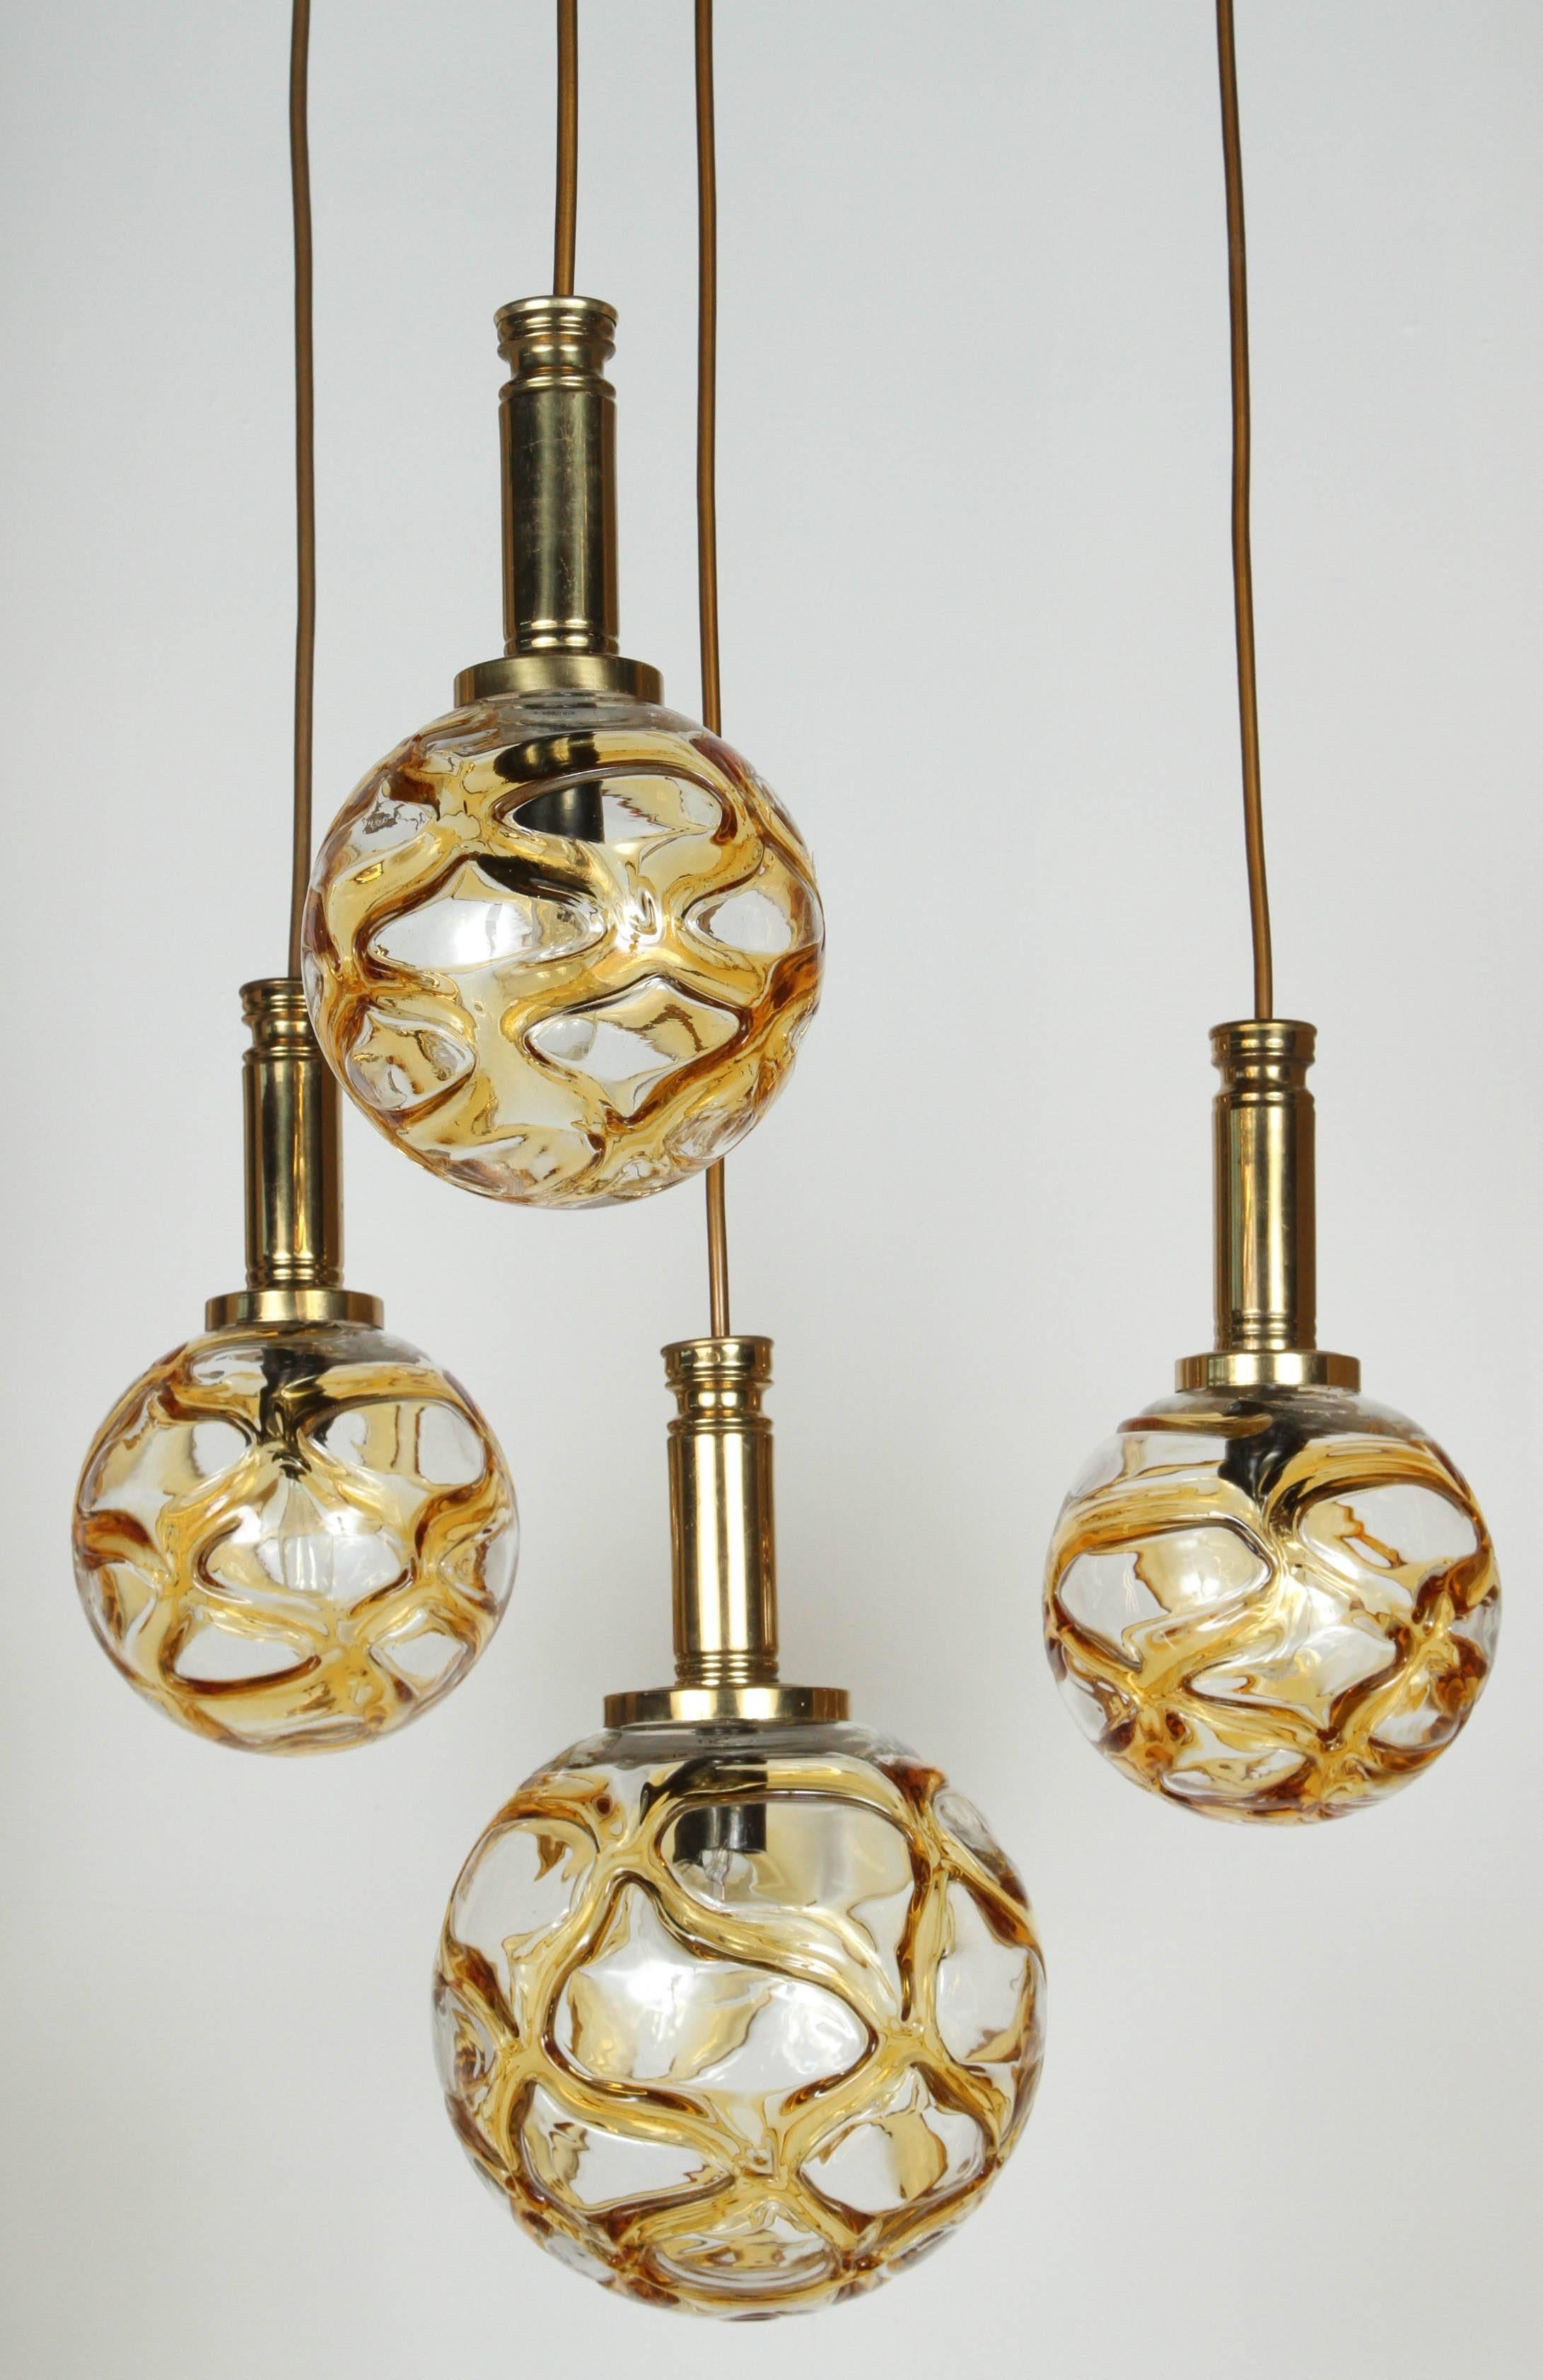 Organic globe fixture by Doria Lighting co.
The polished brass fixture supports 2 different size organic style globes of Amber, yellow and clear glass . Each globe has a single light source which have been newly rewired (Max Watts per bulb).